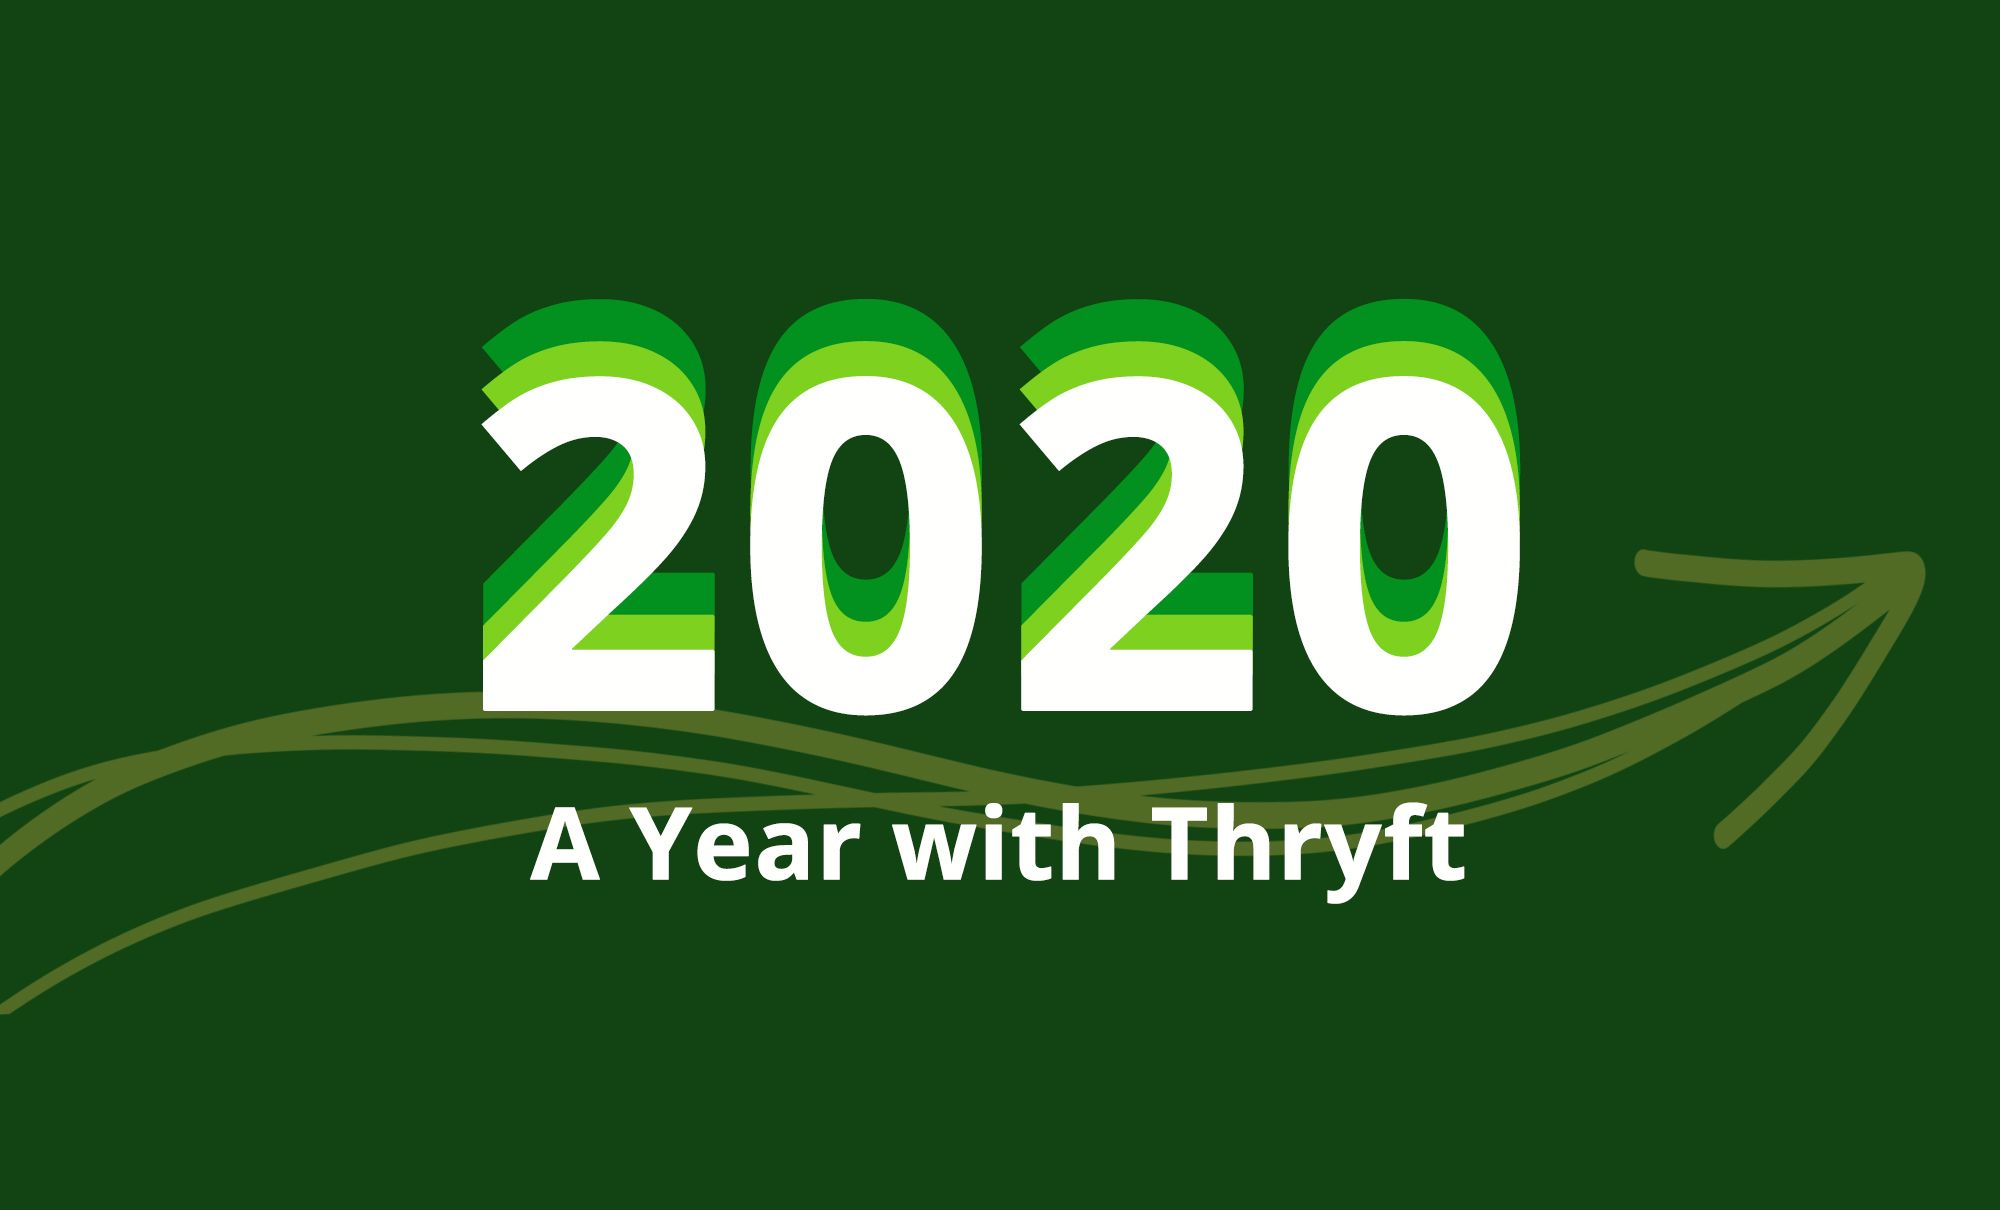 A Year with Thryft